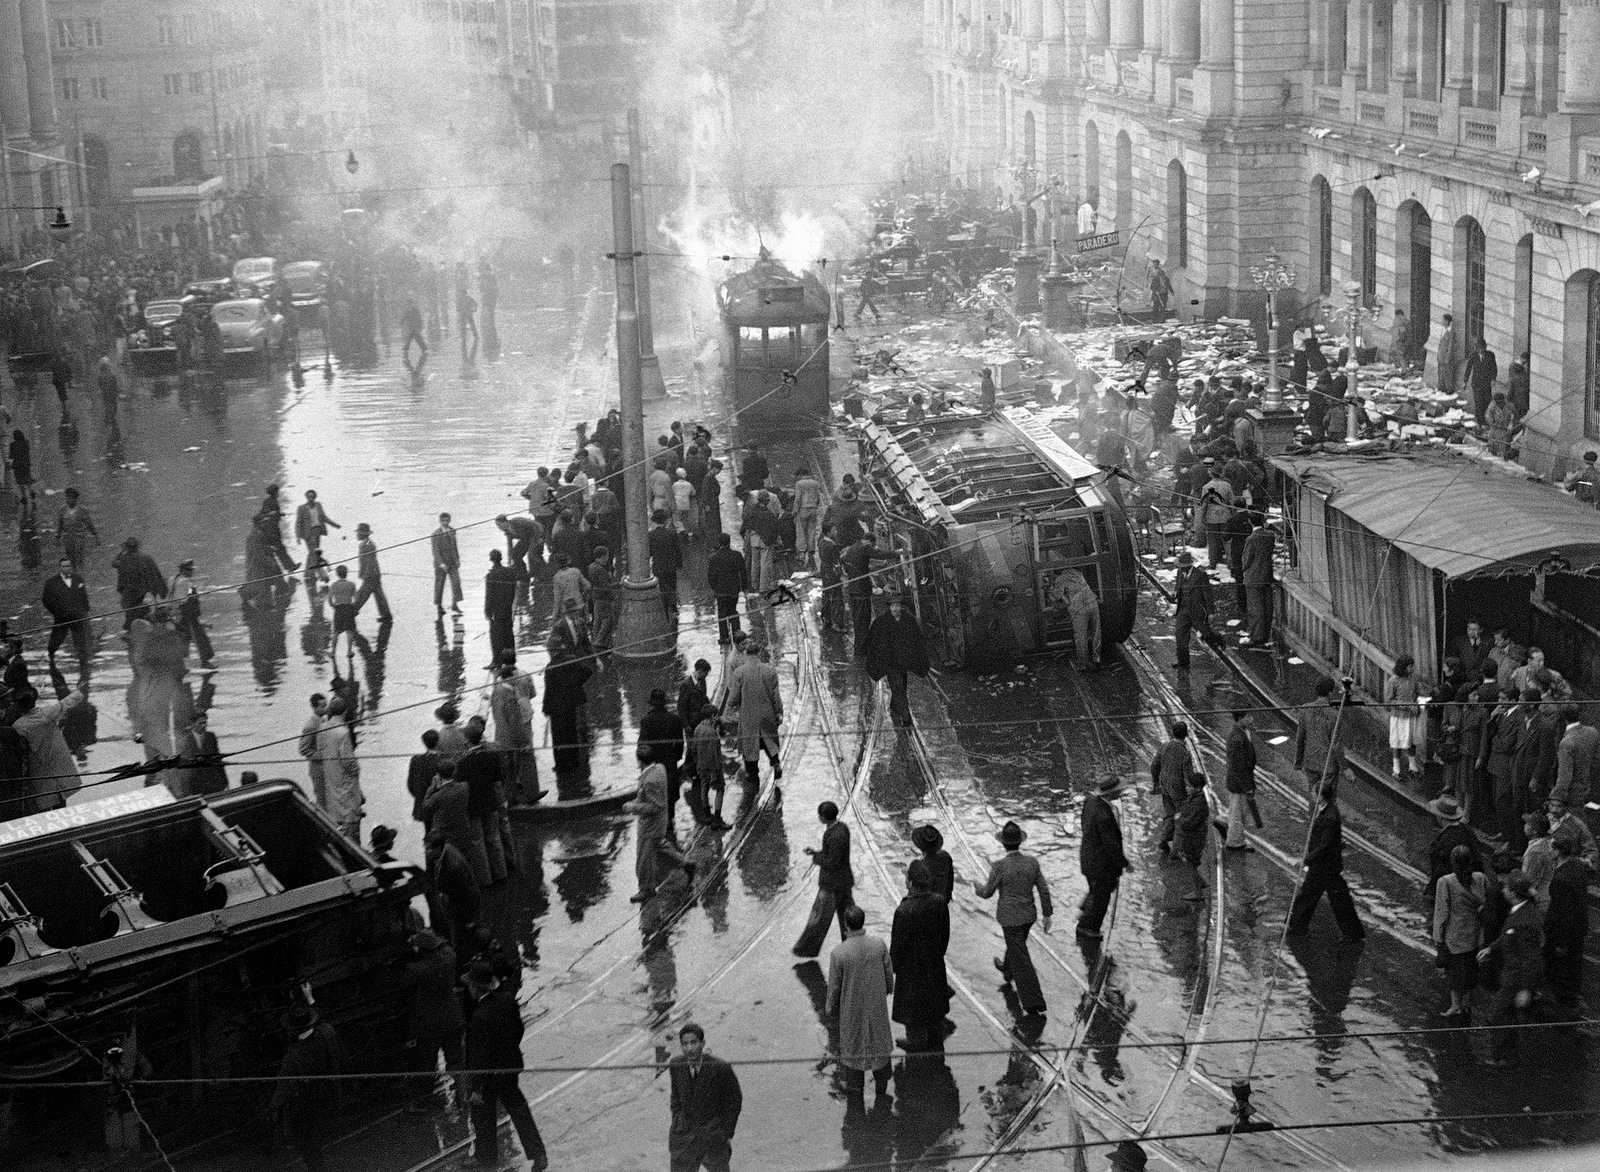 A street car is overturned and burned during an uprising following the assassination of Jorge Eliecer Gaitan in Bogota, Columbia. The 1948 assassination of Gaitan sparked the political bloodletting known as "La Violencia," or "The Violence." (AP/E. L. Almen)